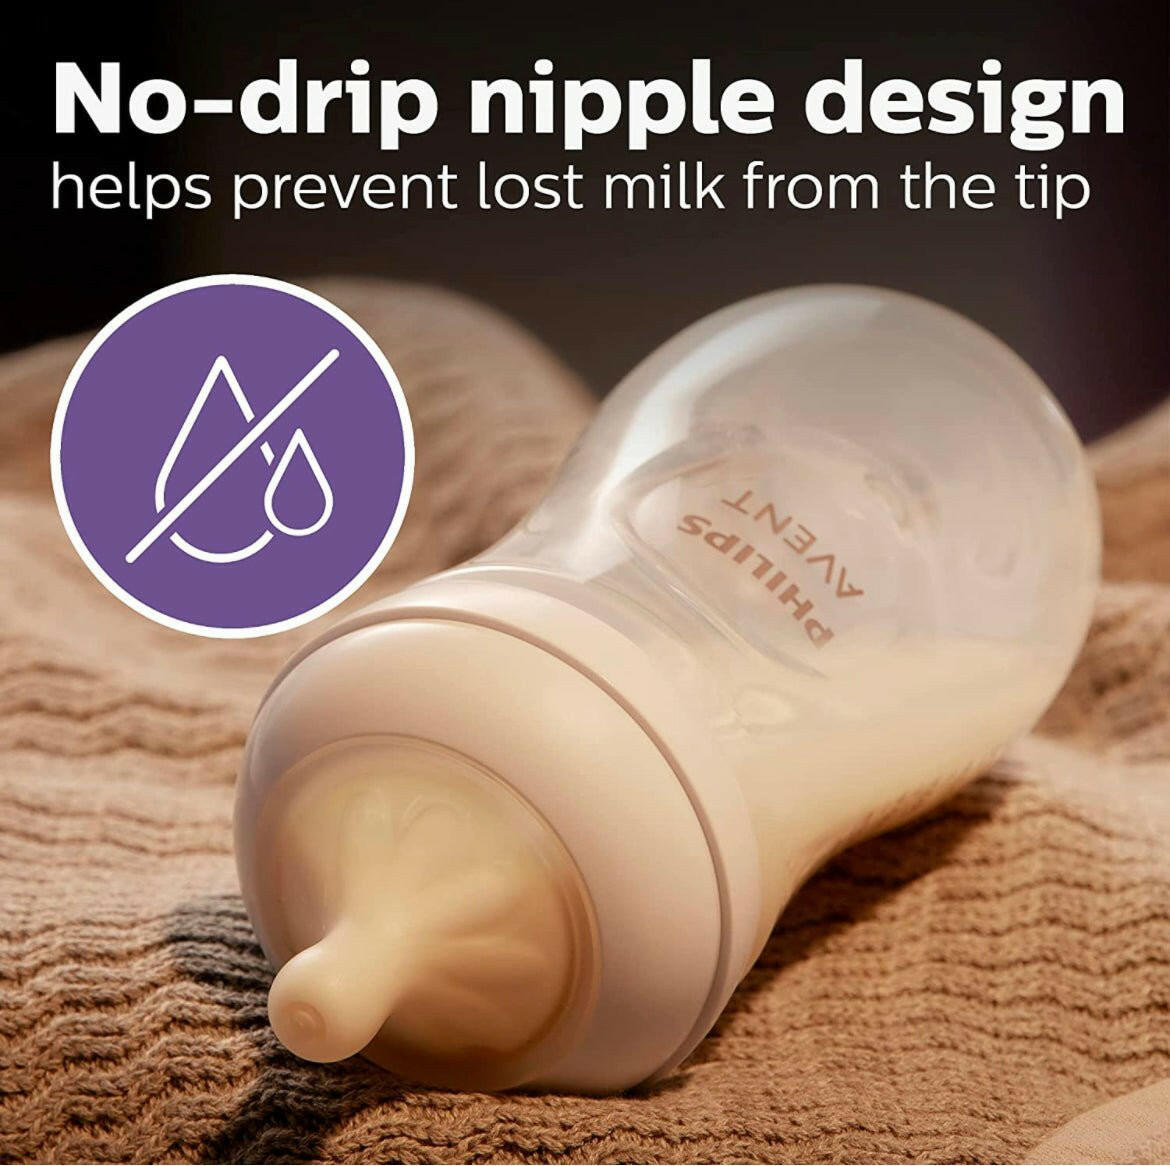 Natural Baby Bottle Nipples by Philips AVENT, Flow 4, 3M+, 2pk.